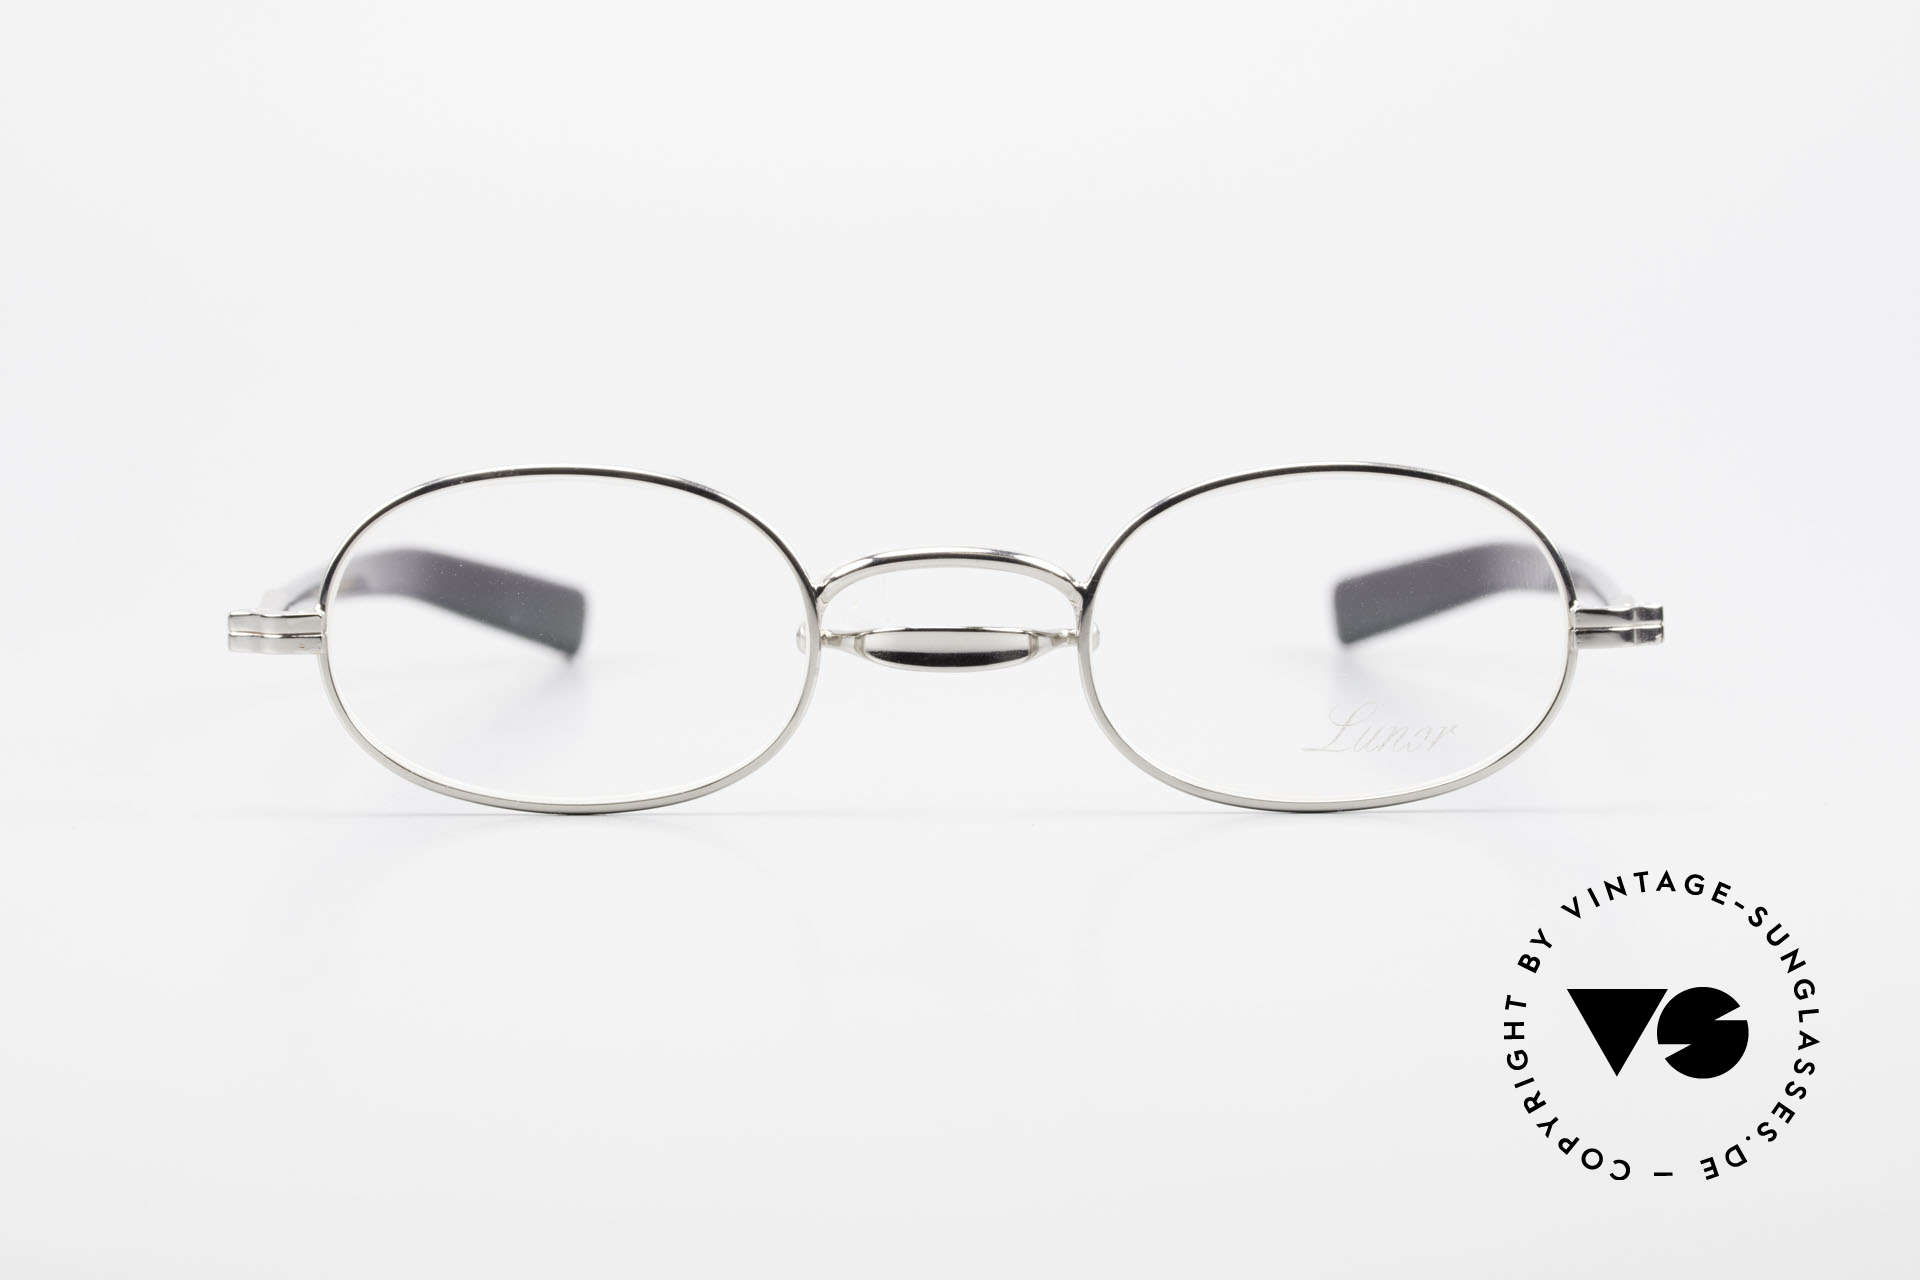 Lunor Swing A 36 Oval Swing Bridge Vintage Glasses, traditional German brand; quality handmade in Germany, Made for Men and Women